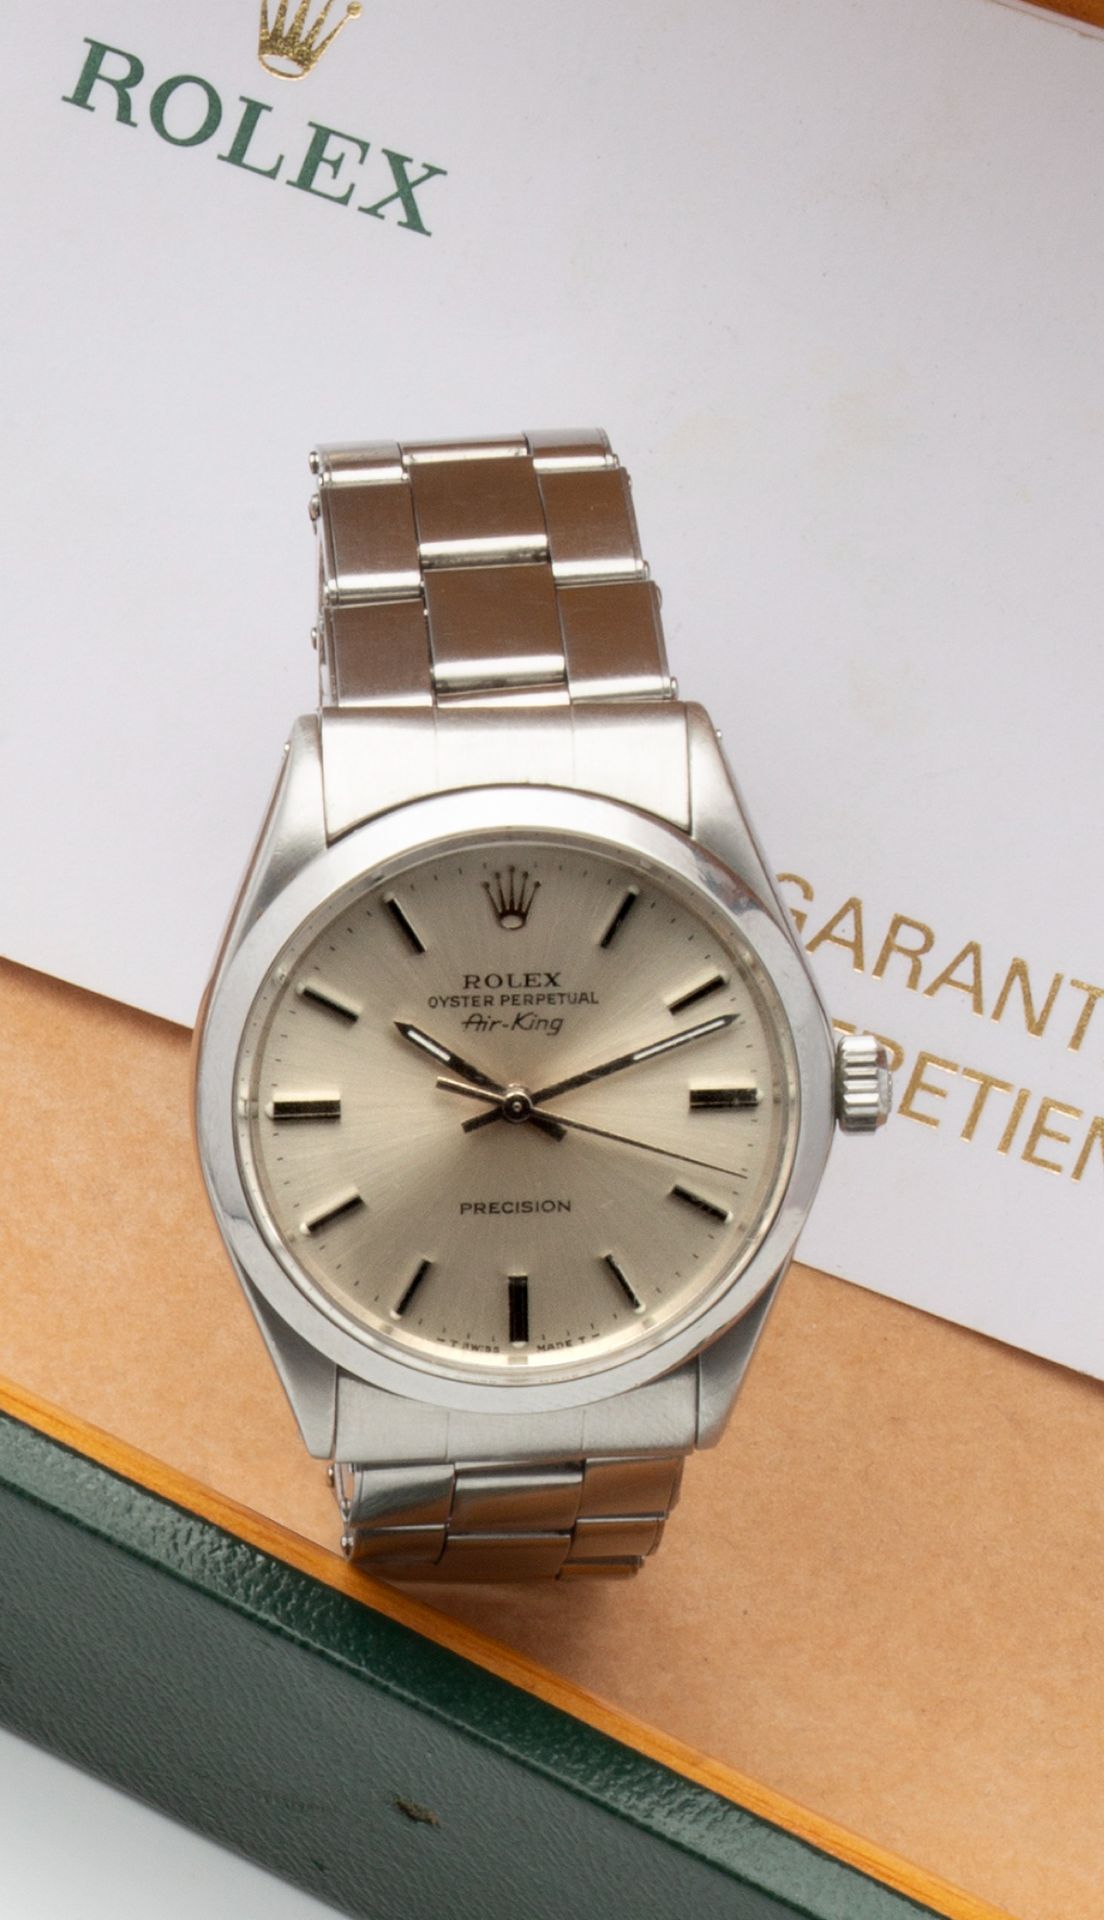 Null Rolex

Oyster Perpetual Air King Precision

Reference 5500

Mixed watch in &hellip;